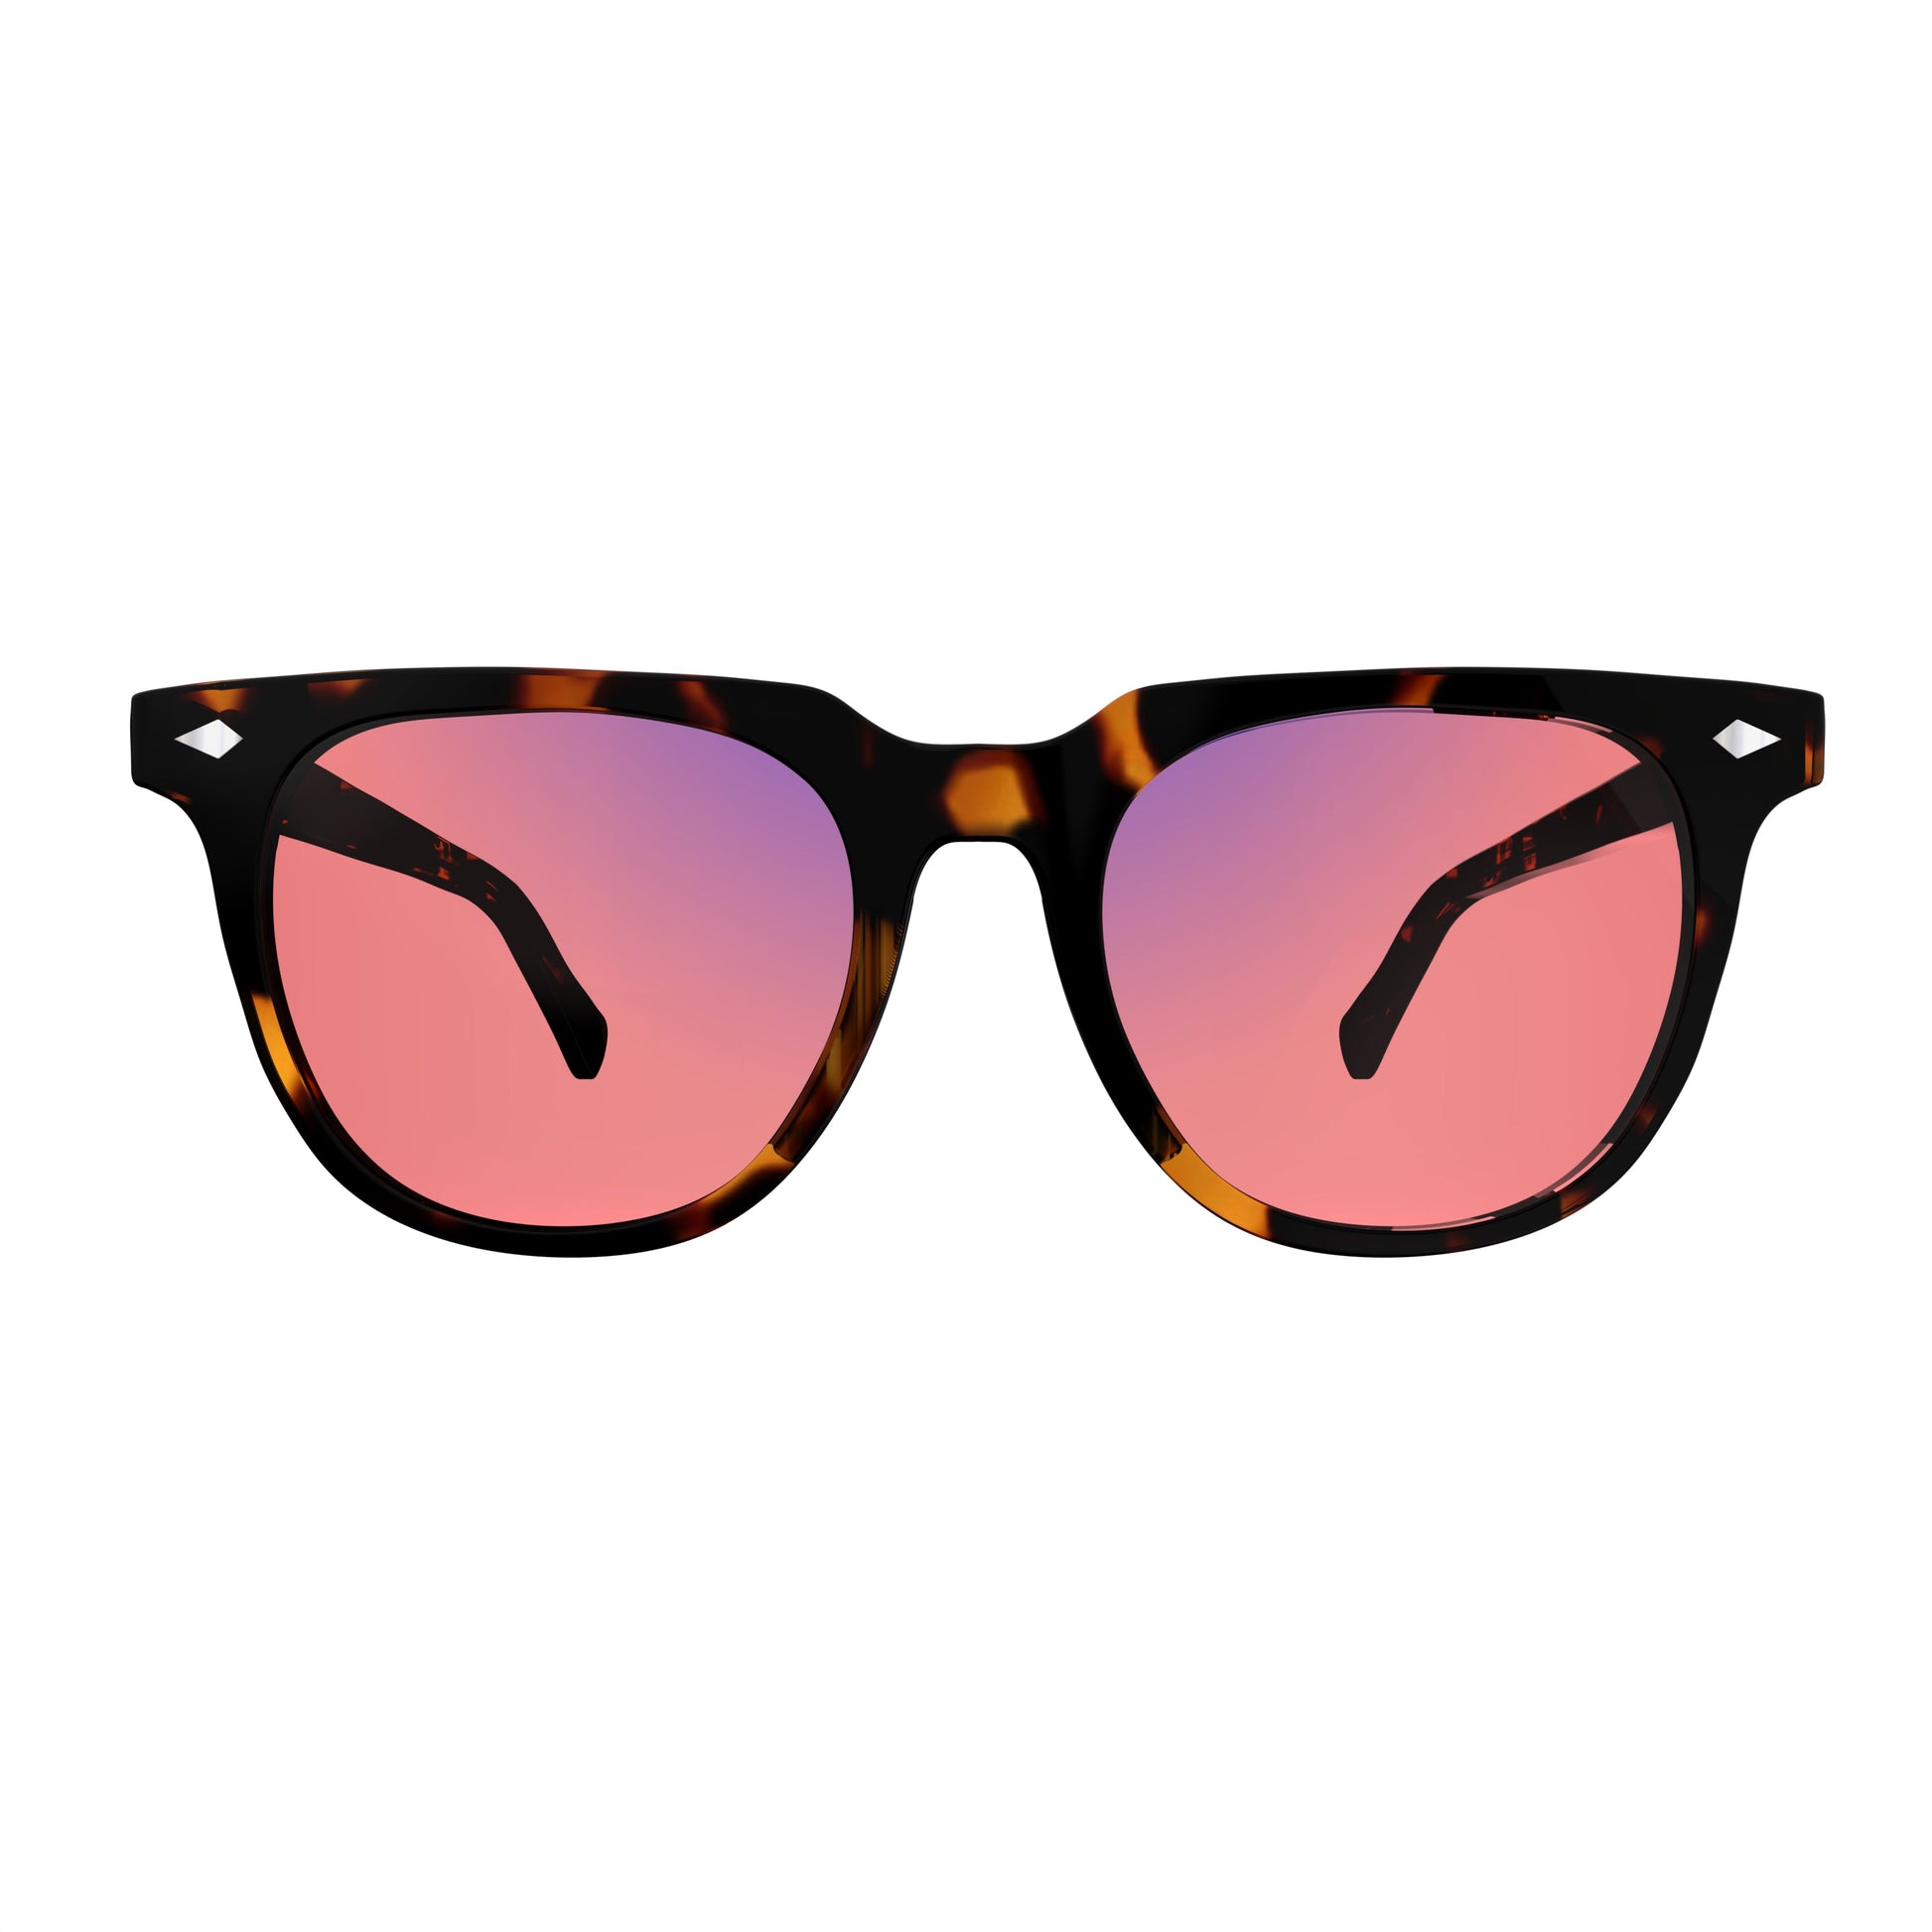 Front view of Sleepaxa Elixir FL-41 Migraine Glasses with Tiger Printed Brown frame, Acetate temples, and rose-tinted lenses with blue block and blue anti reflection properties , designed with smooth high-quality acetate frame material for Migraine & Light Sensitivity